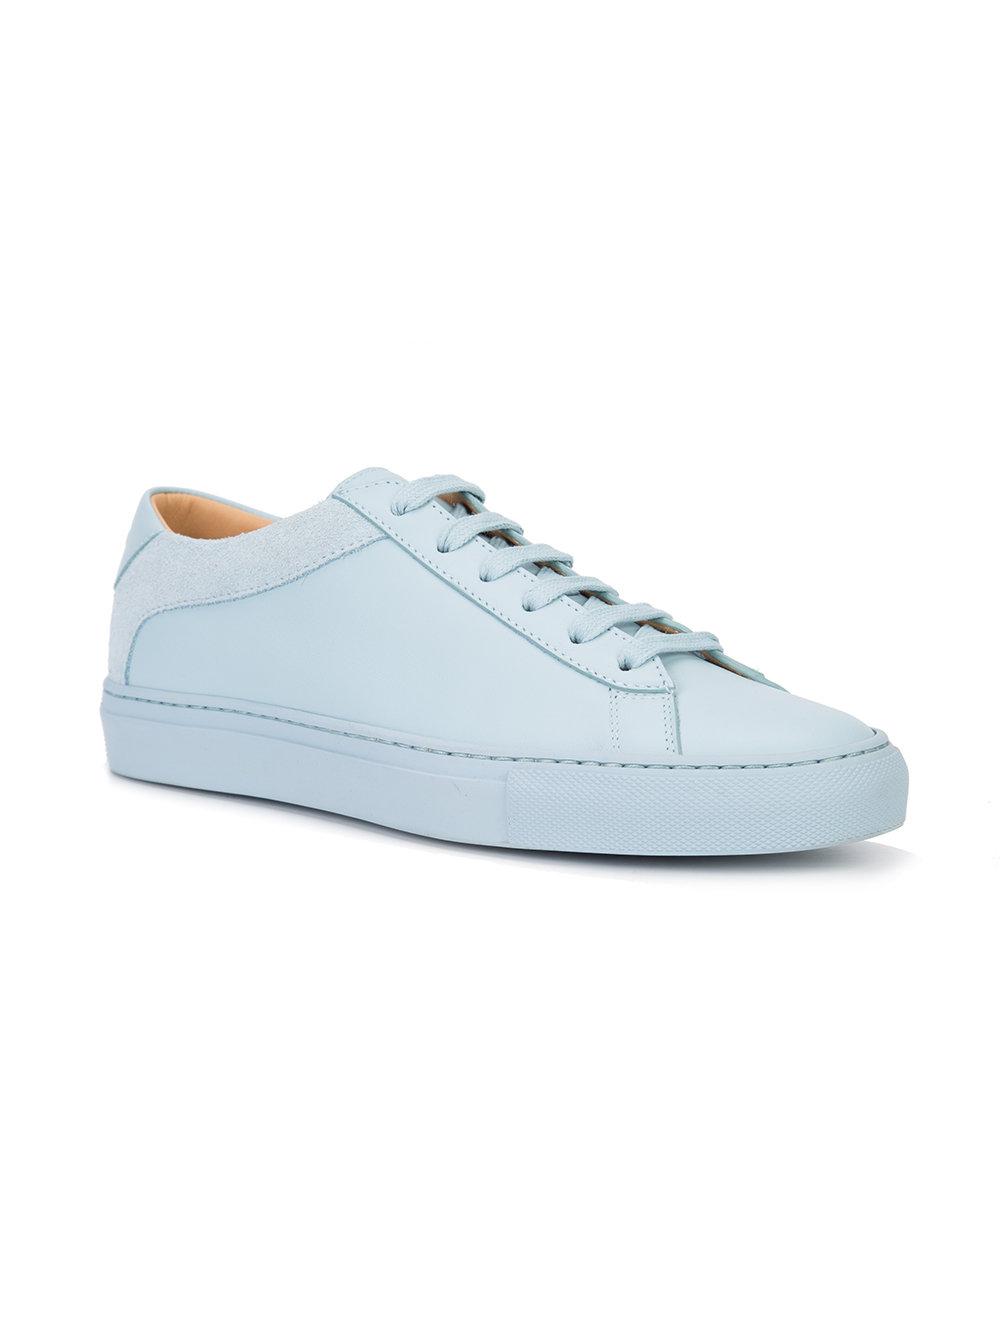 KOIO Leather Capri Cielo Sneakers in Blue - Lyst